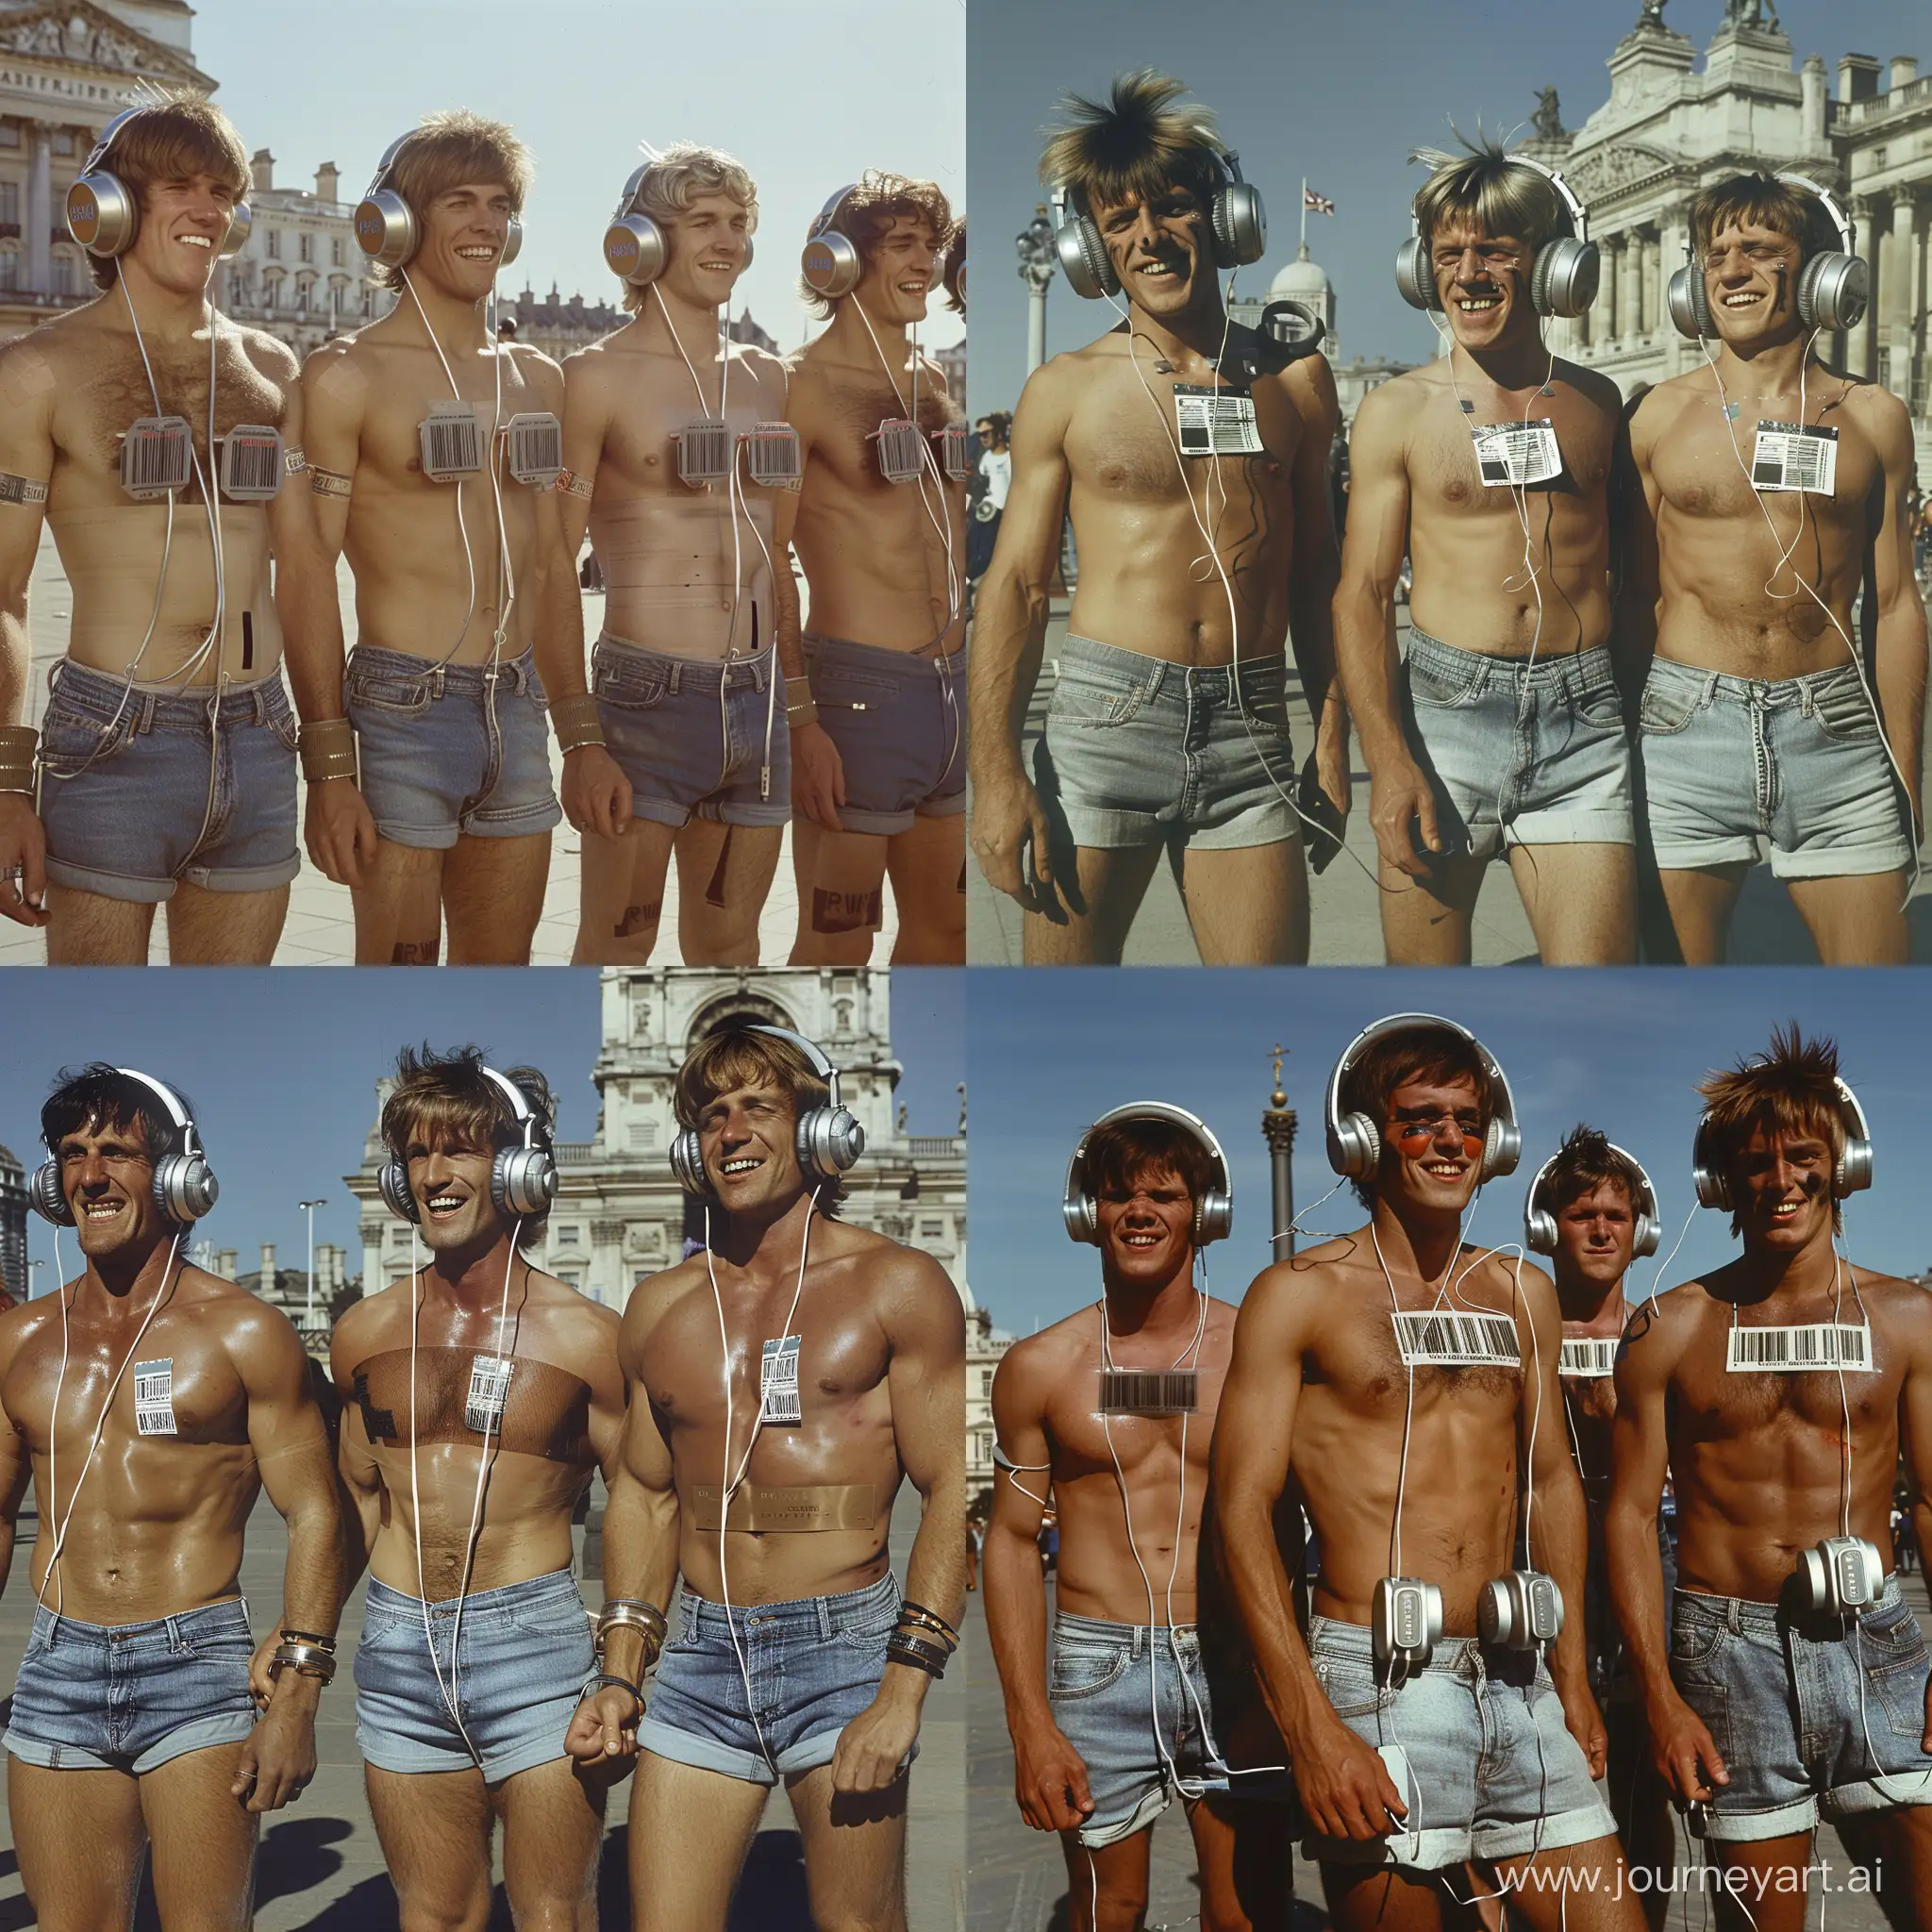 Handsome muscular middle-aged men  each wear silver headphones and fitted denim cutoff shorts, dazed smiles, small barcode attached to each man's chest, punk hairstyles, 1970s Trafalgar Square setting, facing the viewer, mass indoctrination, color image, hyperrealistic, cinematic
